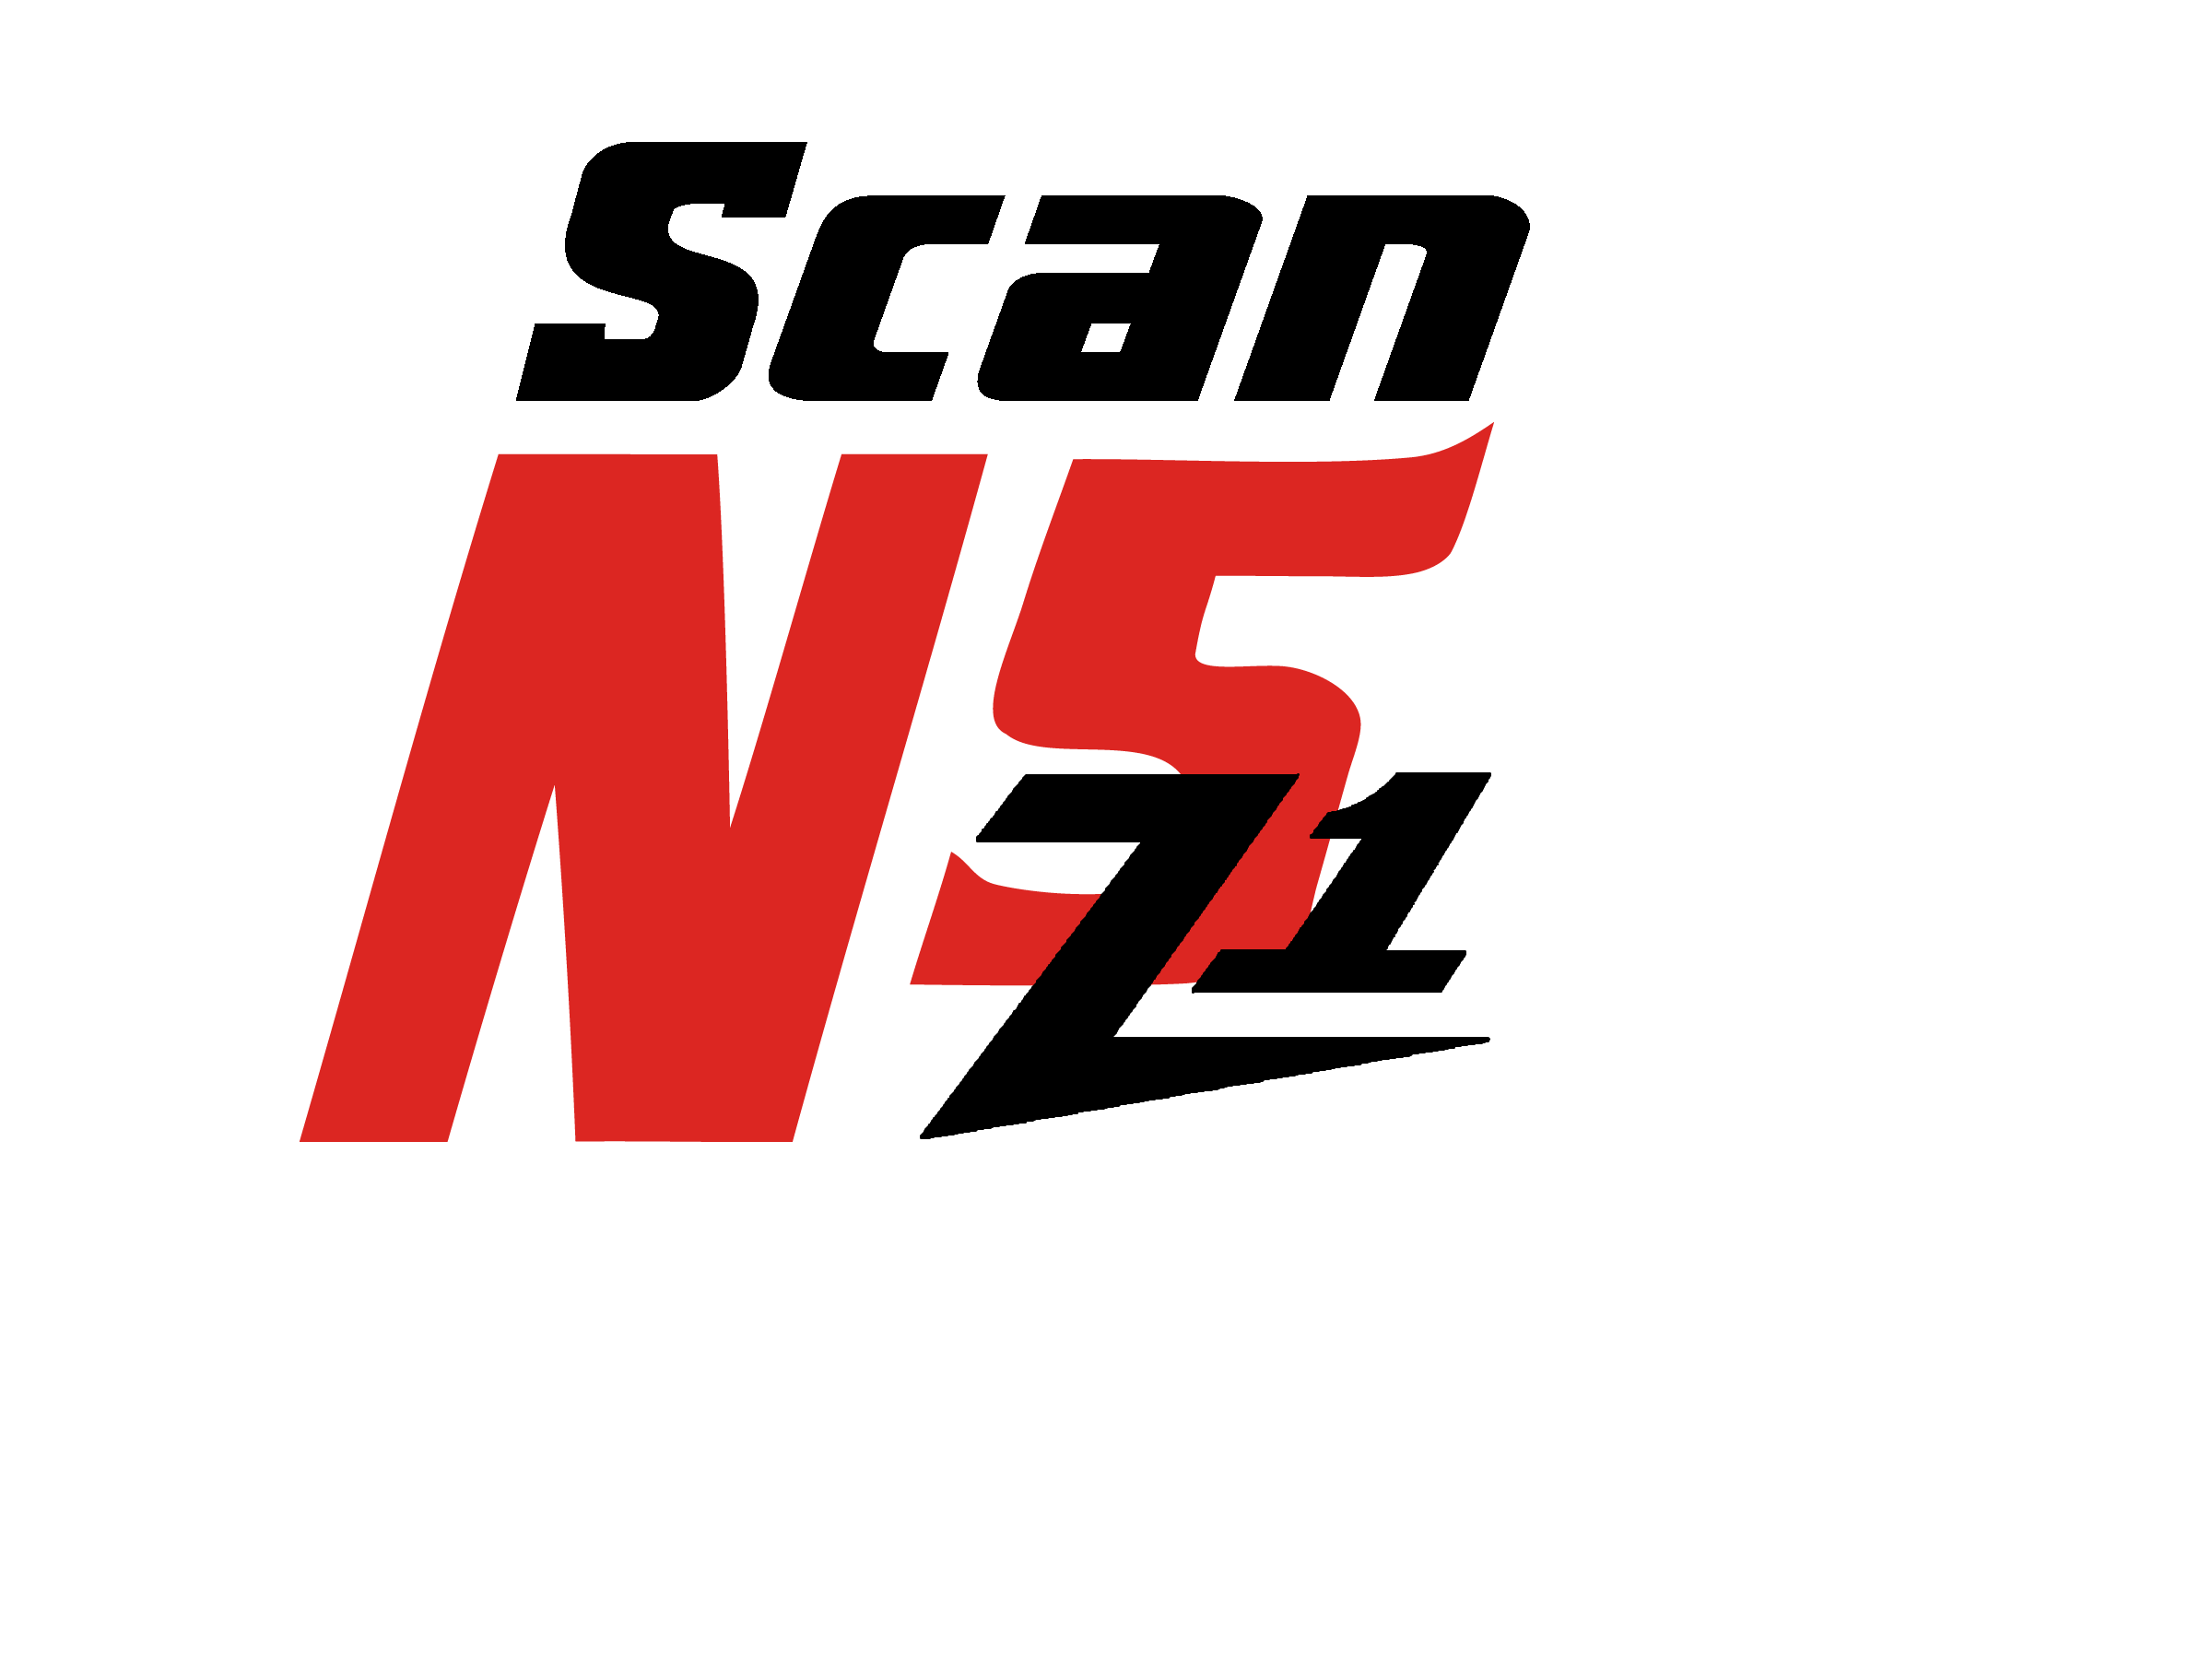 N5Scan is the rugged handheld Android computer logo